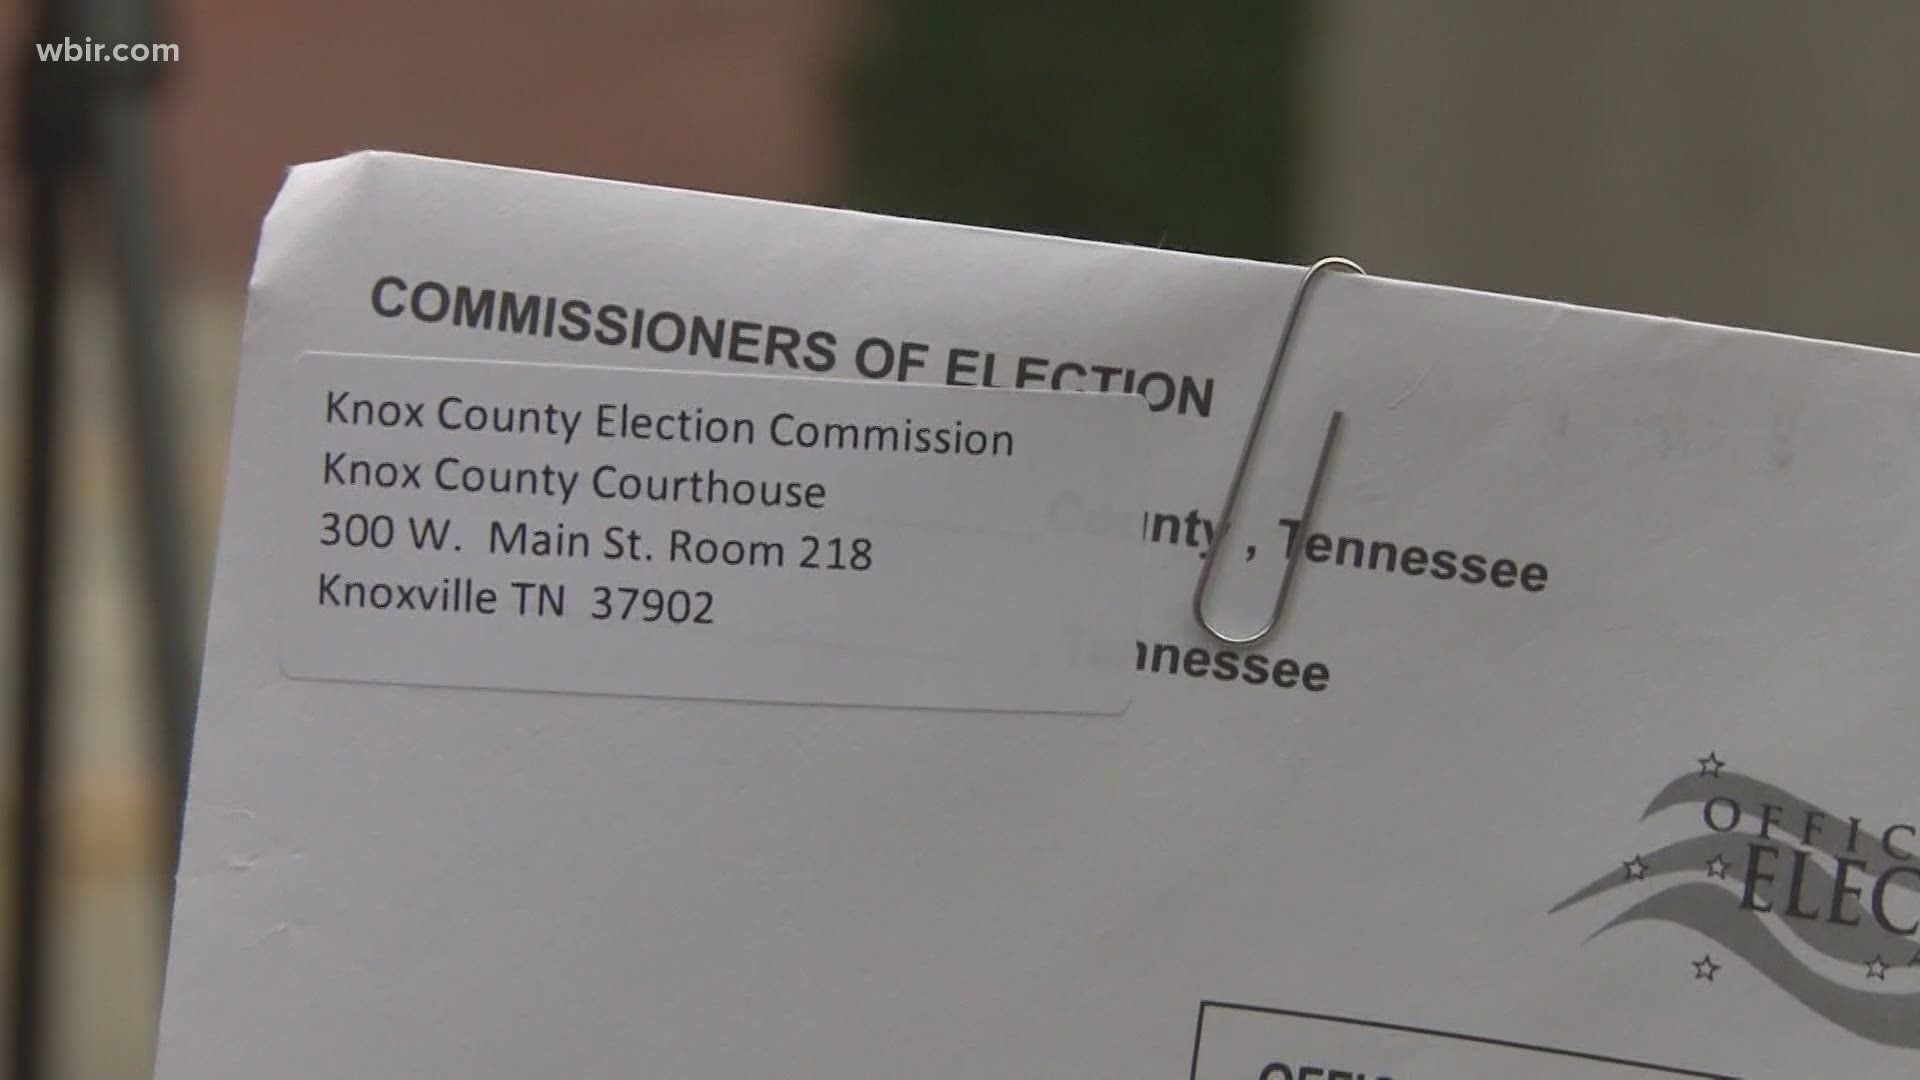 State and local election commissions, and the FBI, are all taking election security seriously.